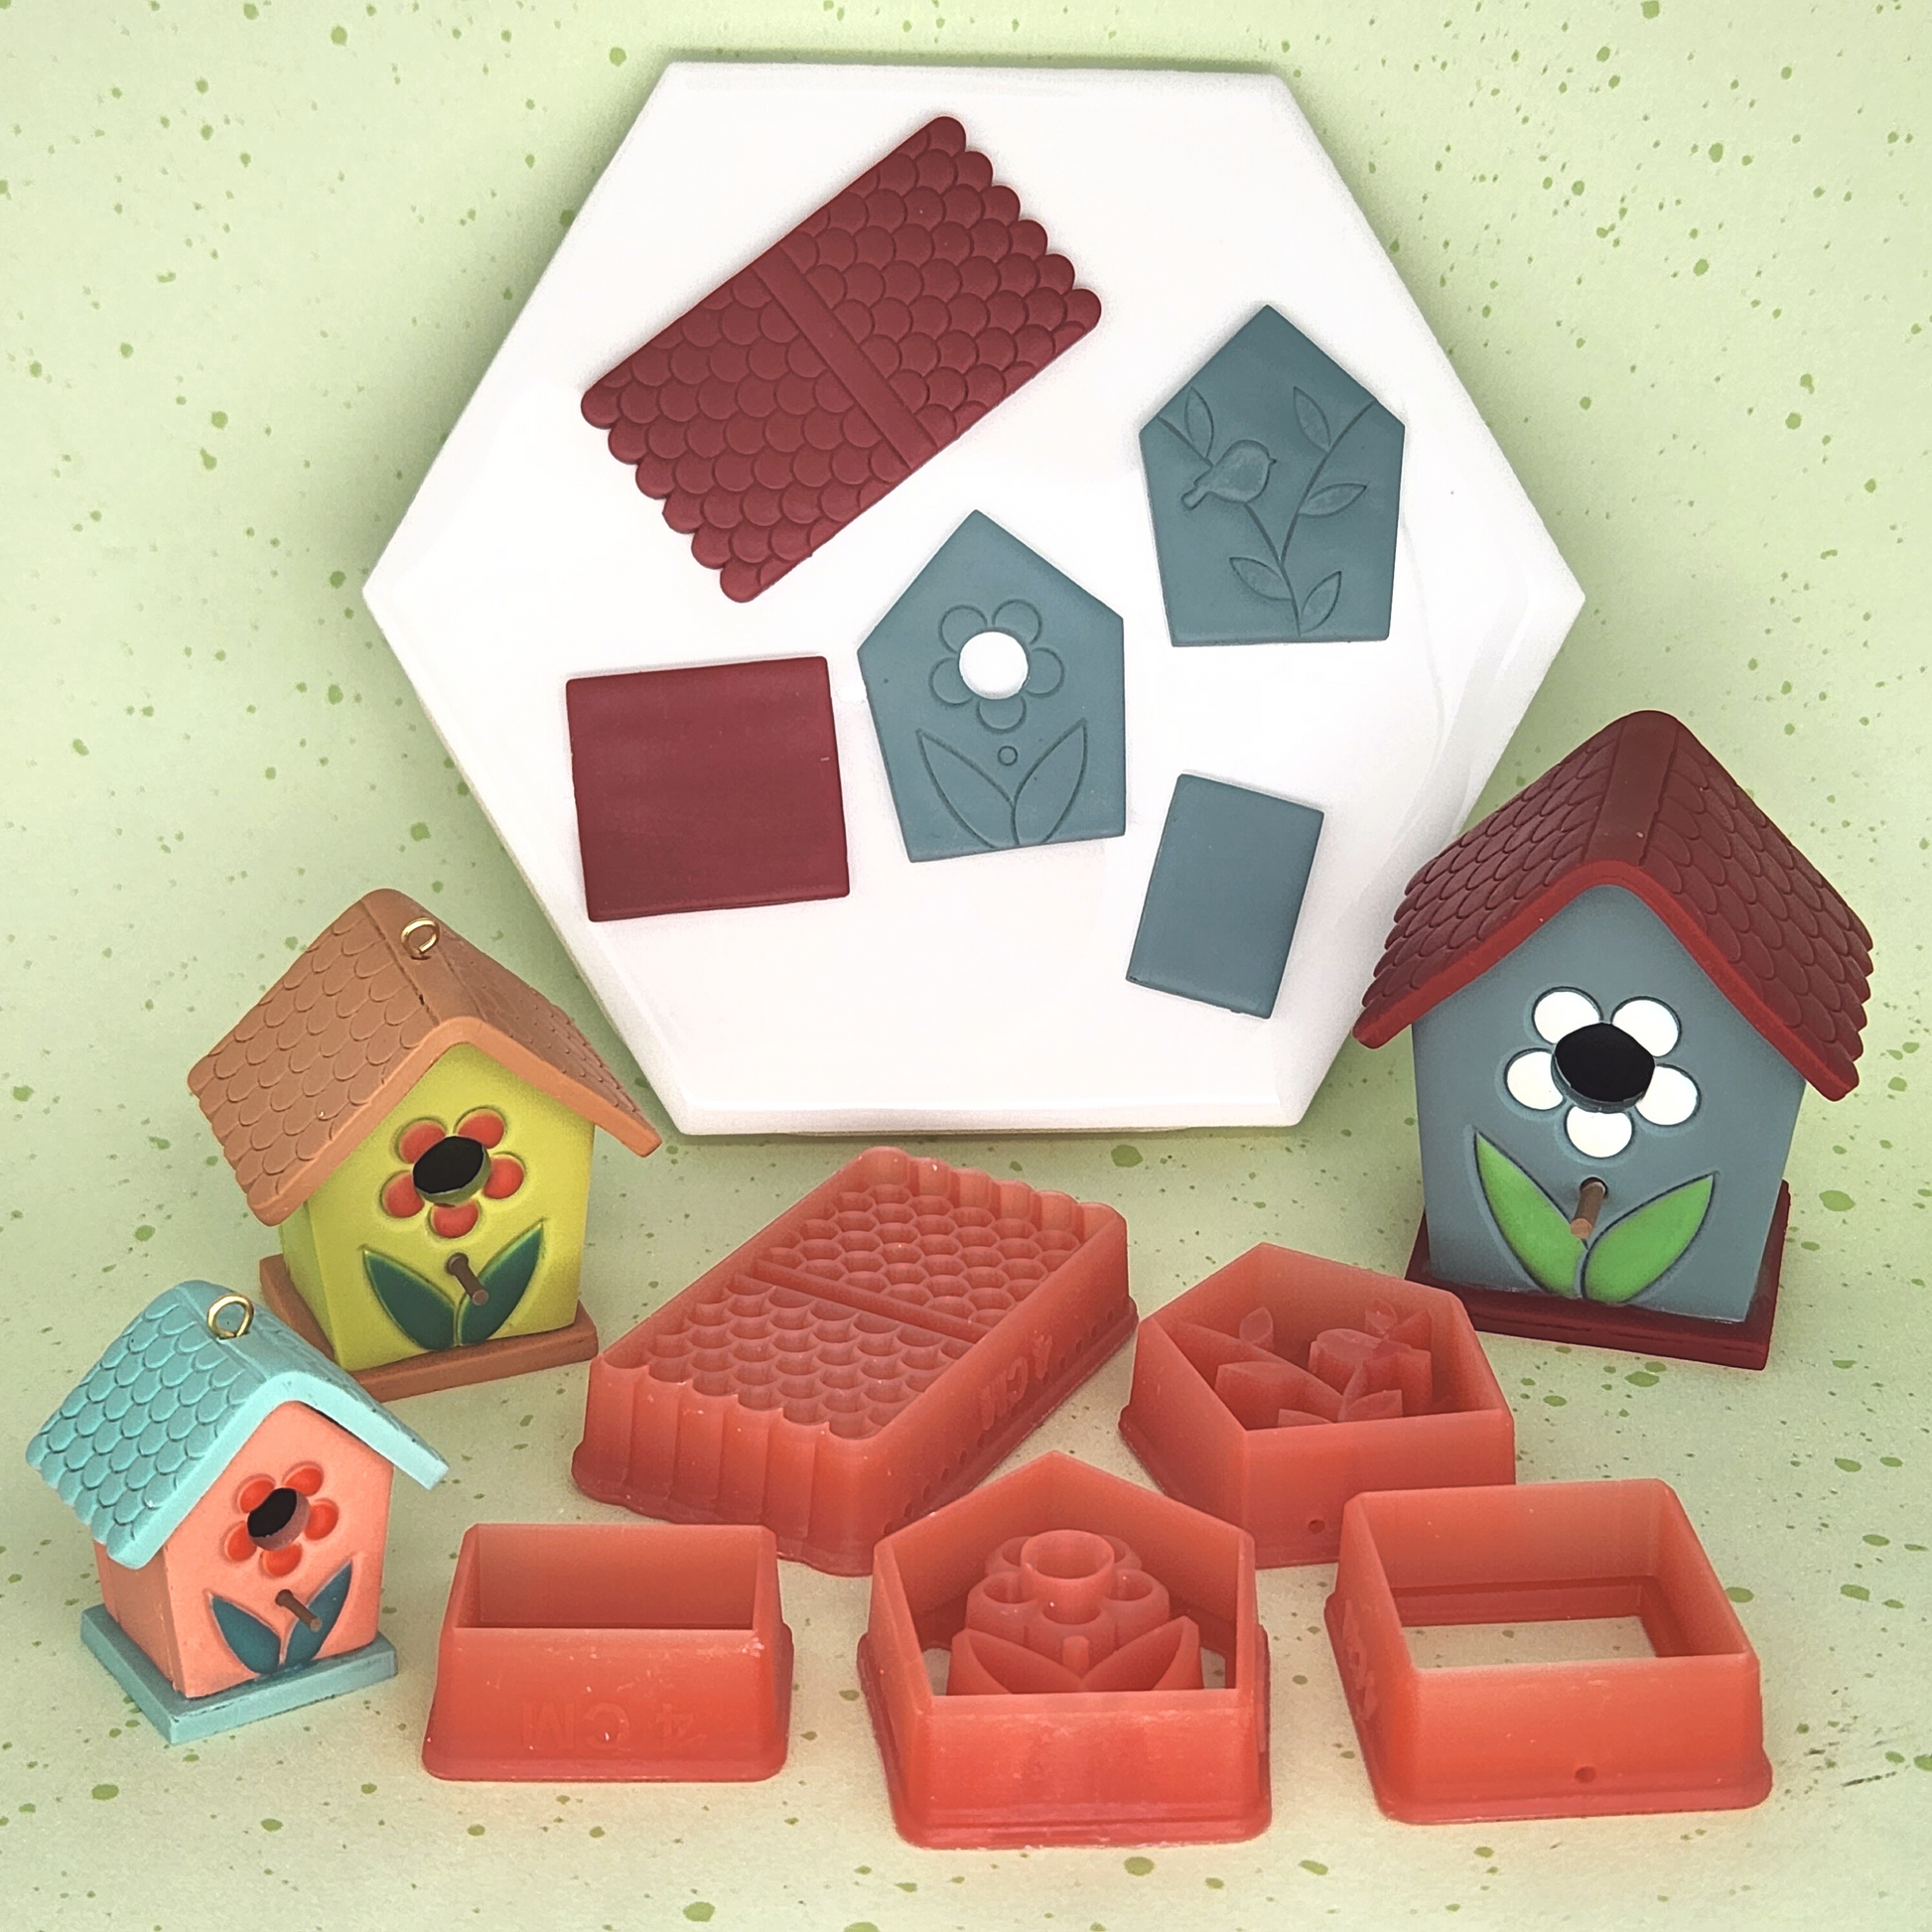 3D Birdhouse Kit consists of front, back, side, roof, and bottom polymer clay cutters